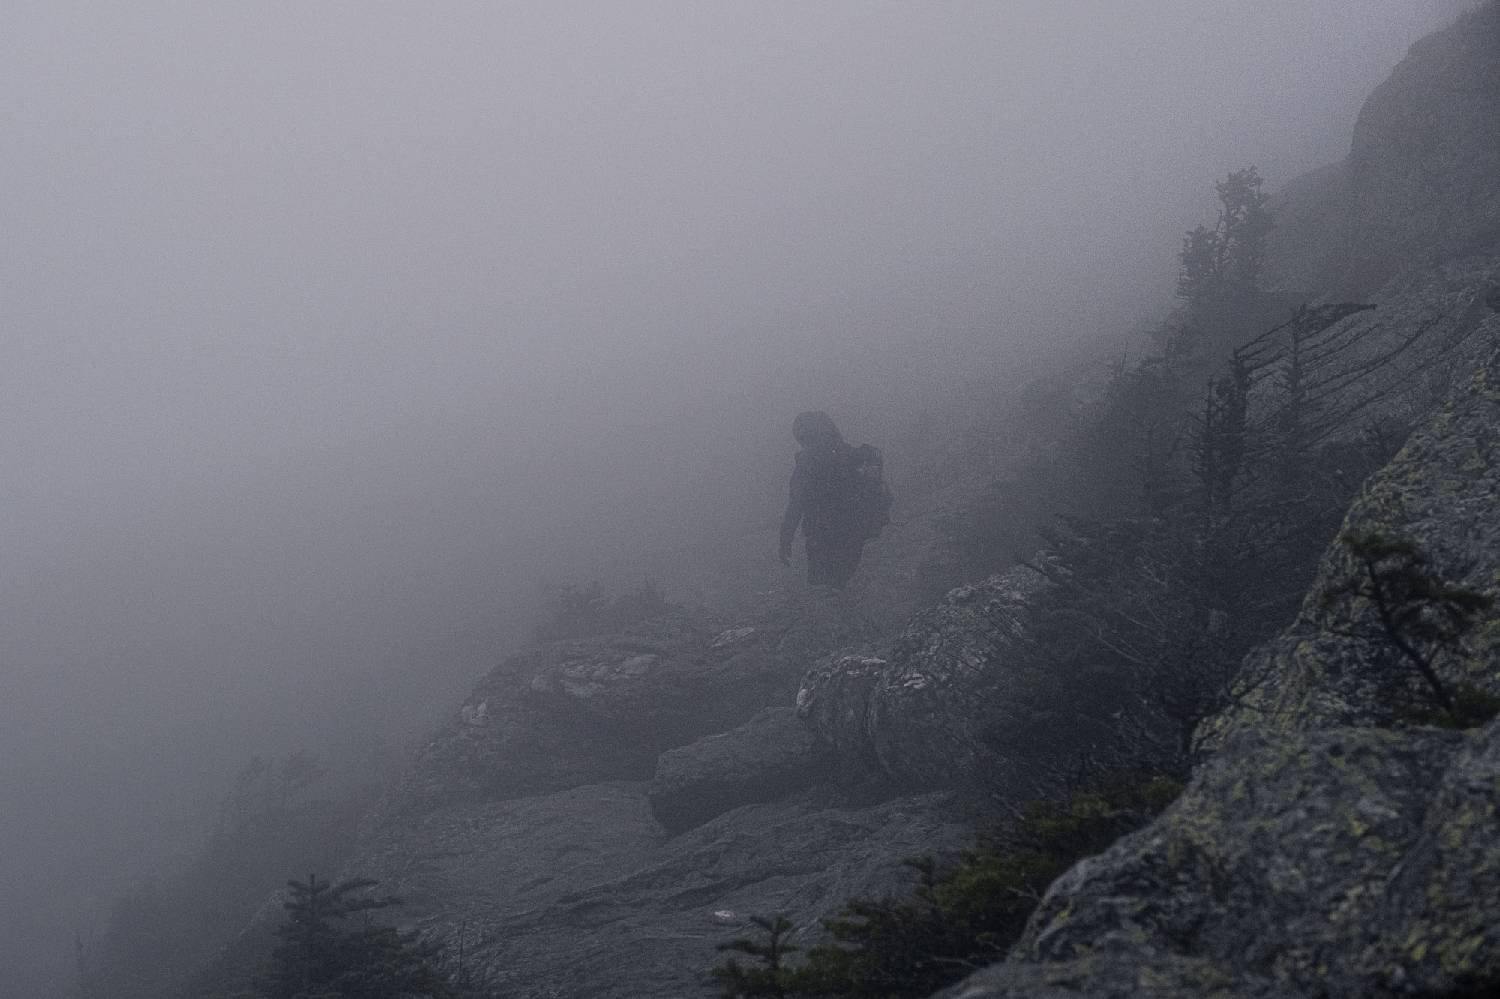 A very foggy scene with a Long Trail hiker on the Long Trail